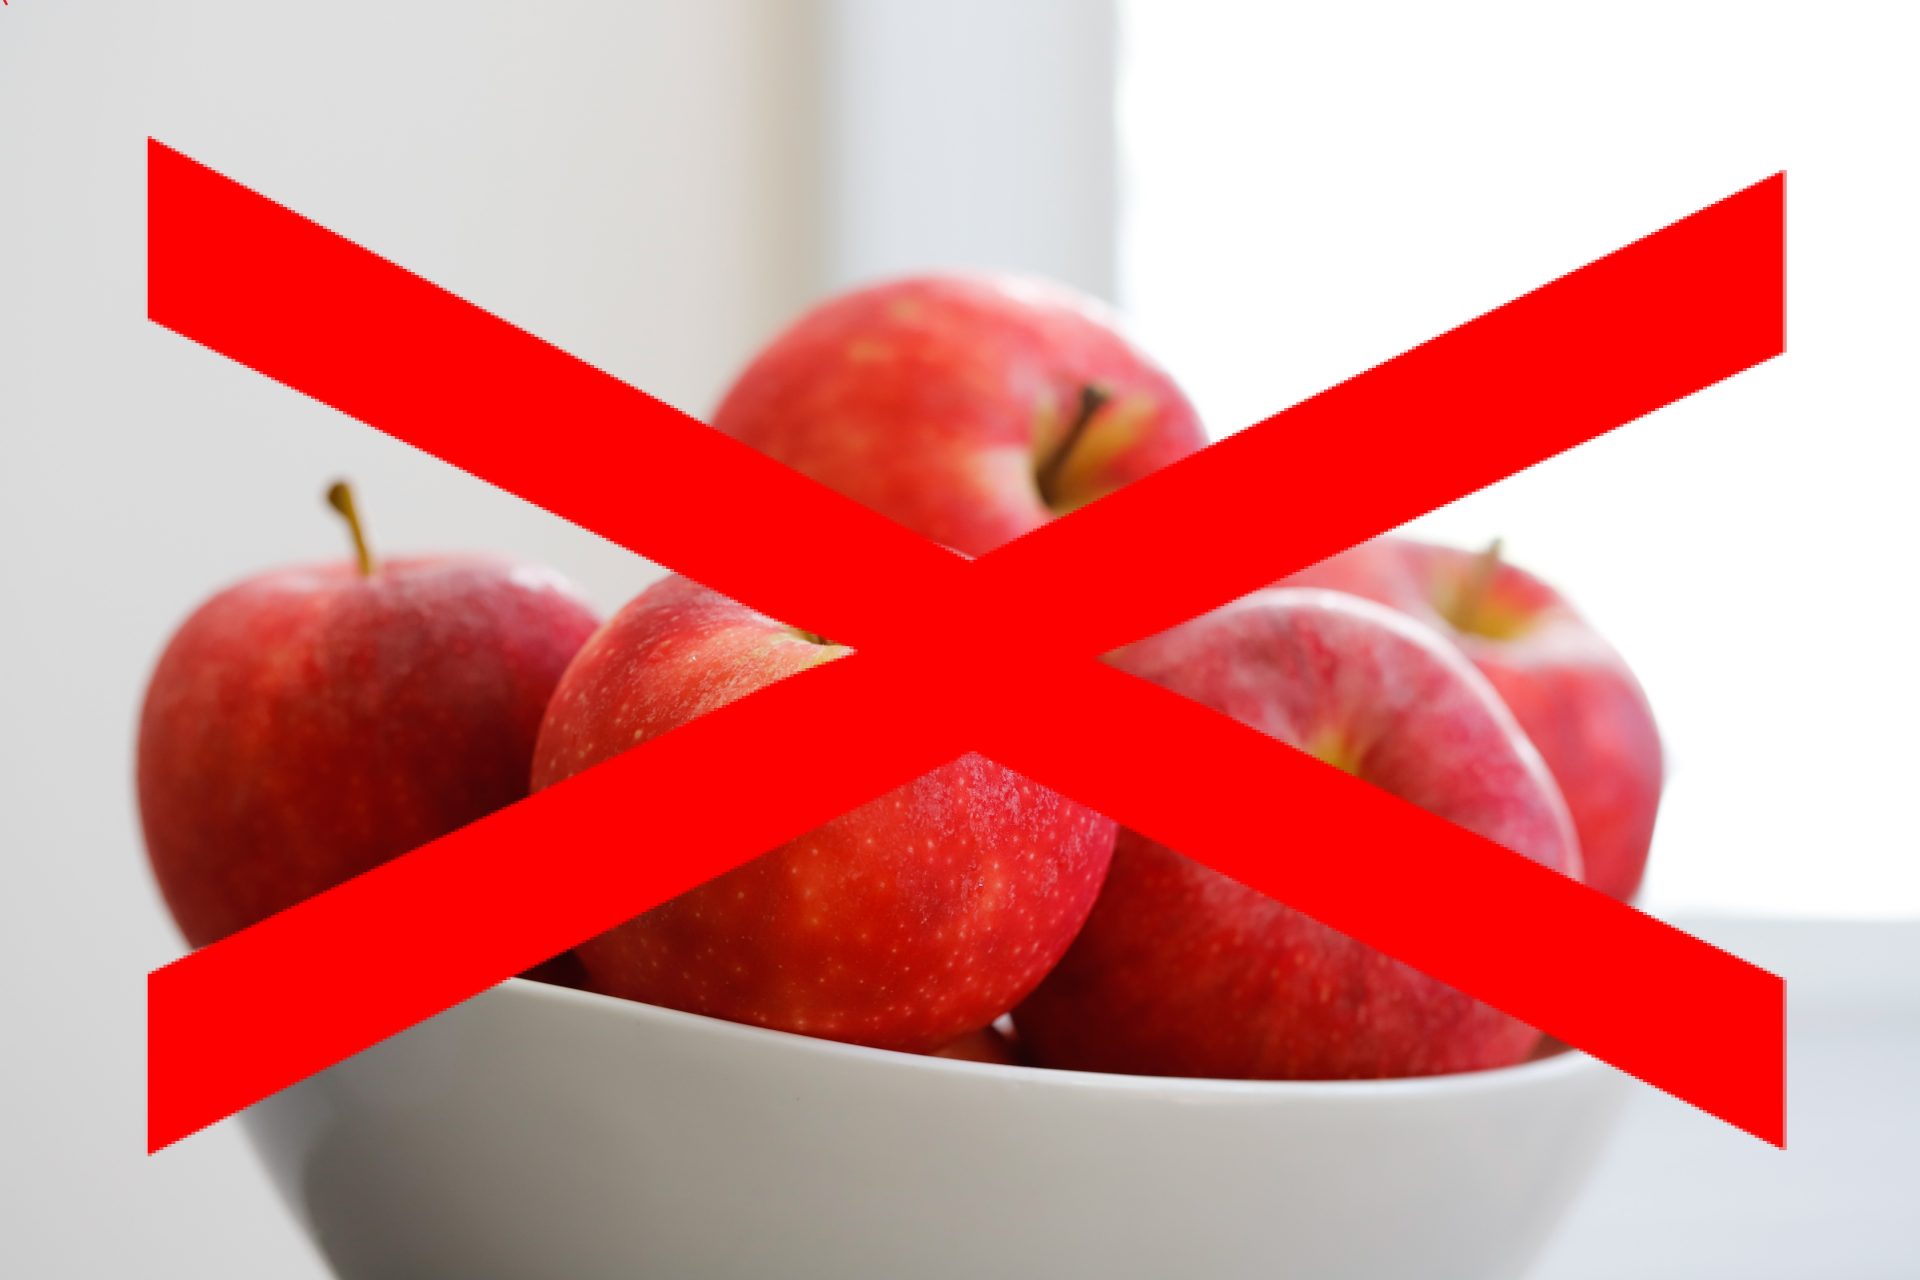 Apples: Fruit bowls are nonsense 